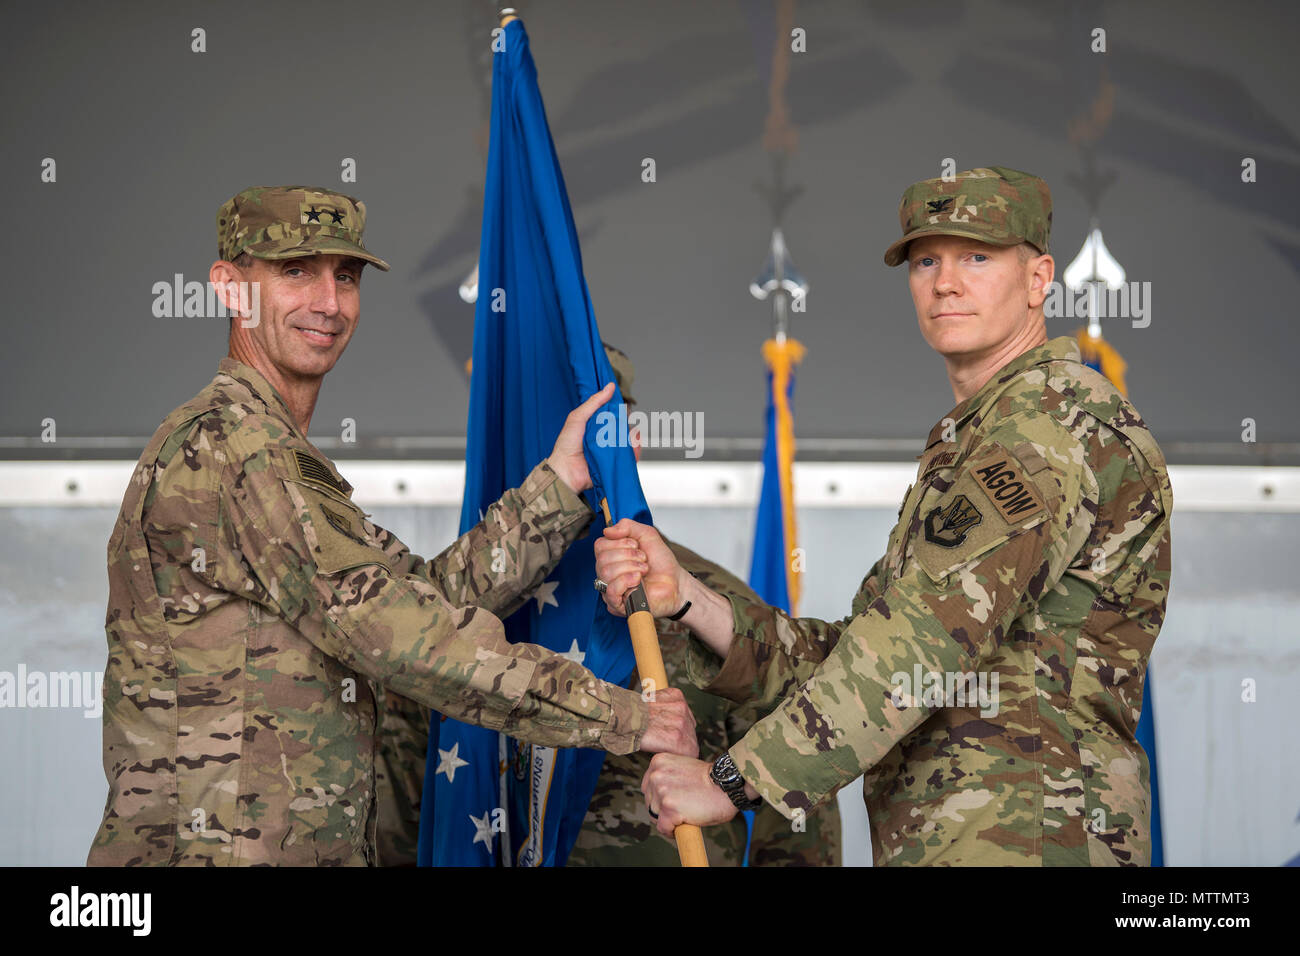 Maj. General Scott Zobrist, left, 9th Air Force Commander, hands the guidon to Col. Paul Birch, incoming 93d Air Ground Operations Wing (AGOW) commander, during a change of command ceremony, May 23, 2018, at Moody Air Force Base, Ga. This event marks the beginning of a new regime as Birch becomes the 7th commander of the 93d AGOW. (U.S. Air Force photo by Airman 1st Class Eugene Oliver) Stock Photo